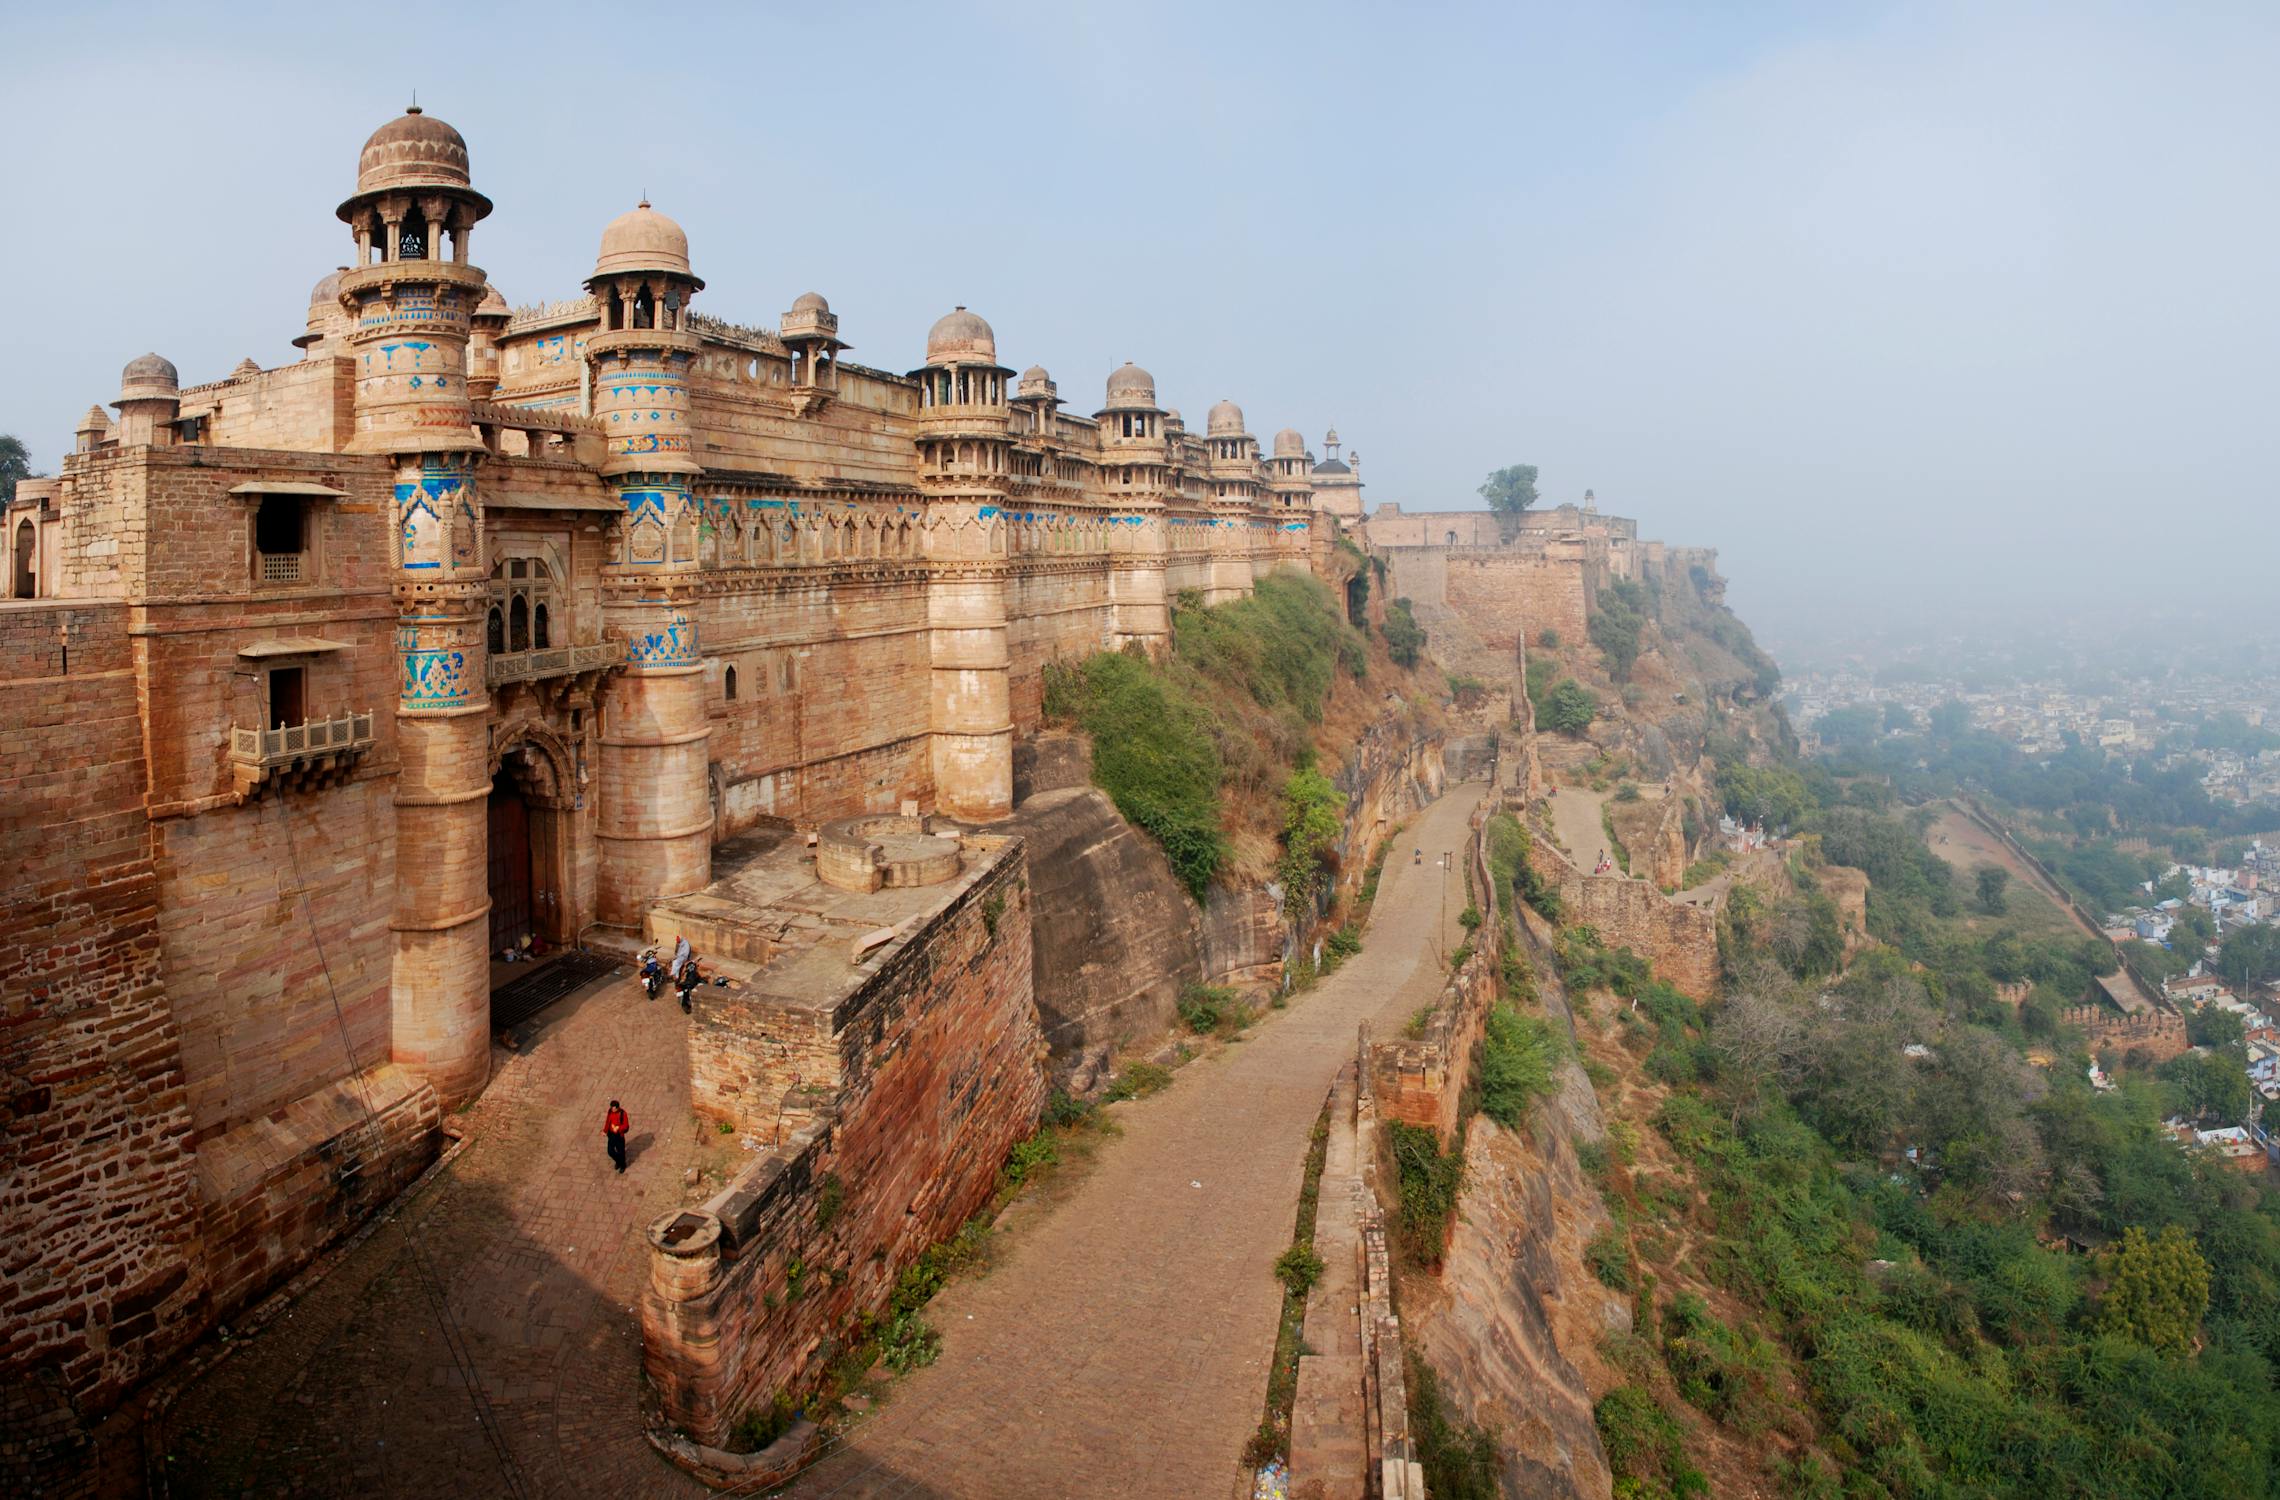 Indian Fort Gwalior, MP, India Photo by Tom D'Arby from Pexels: https://www.pexels.com/photo/brown-palace-on-the-hill-top-5949485/